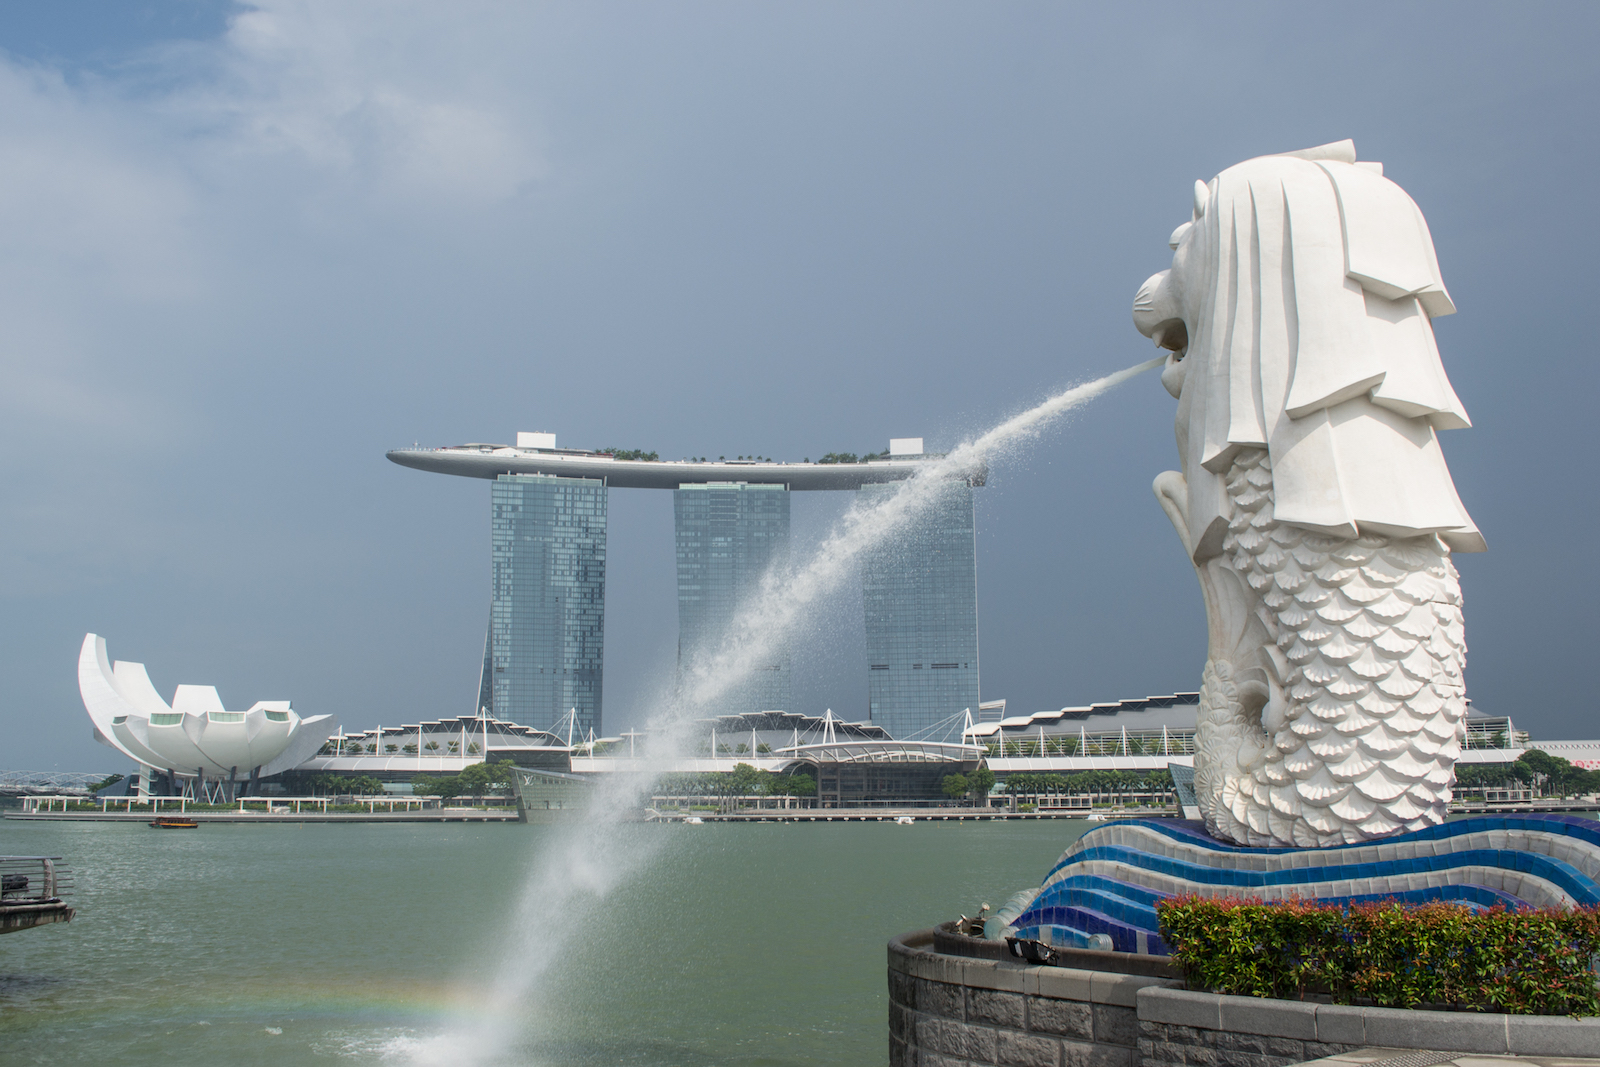 The Marina Bay Sands Hotel behind the Merlion Statue in Singapore at Merlion Park.